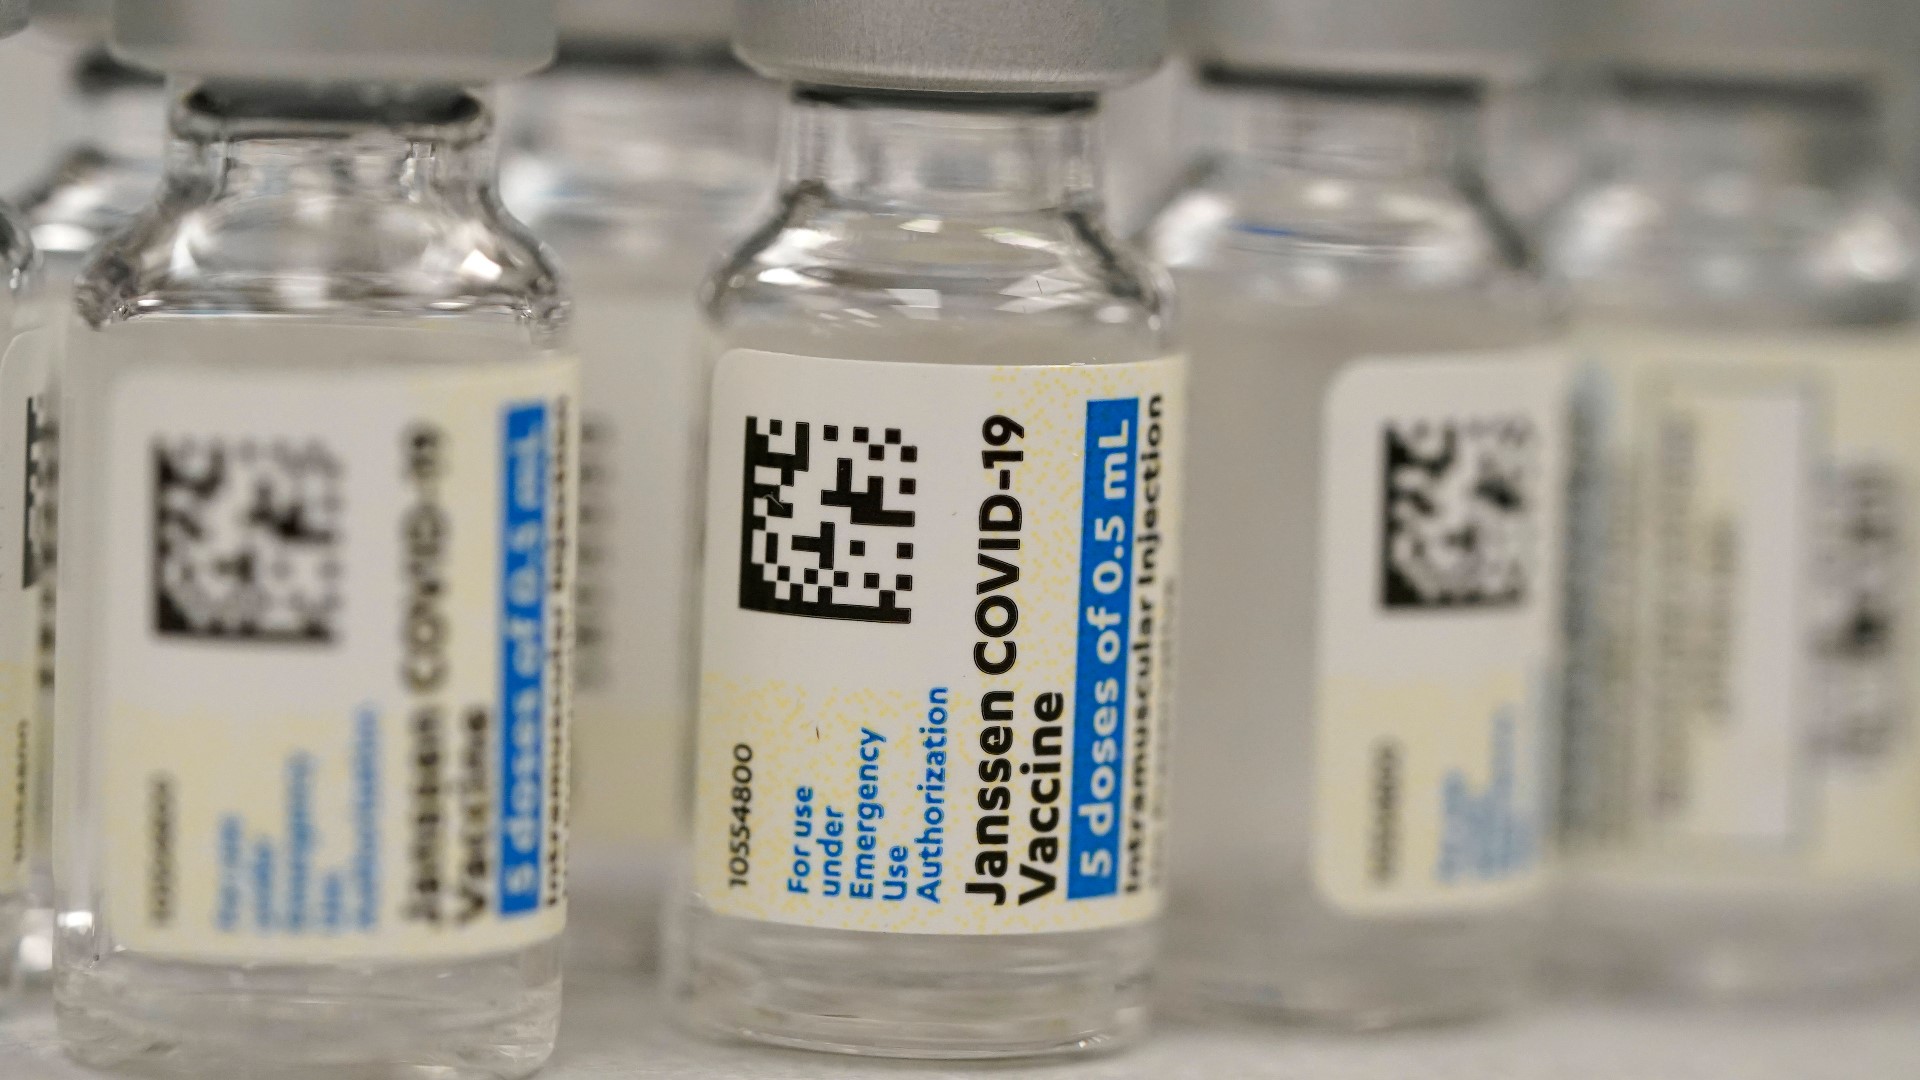 As of Monday, at least 264,311 doses of the J&J vaccine were administer in Ohio according to ODH.